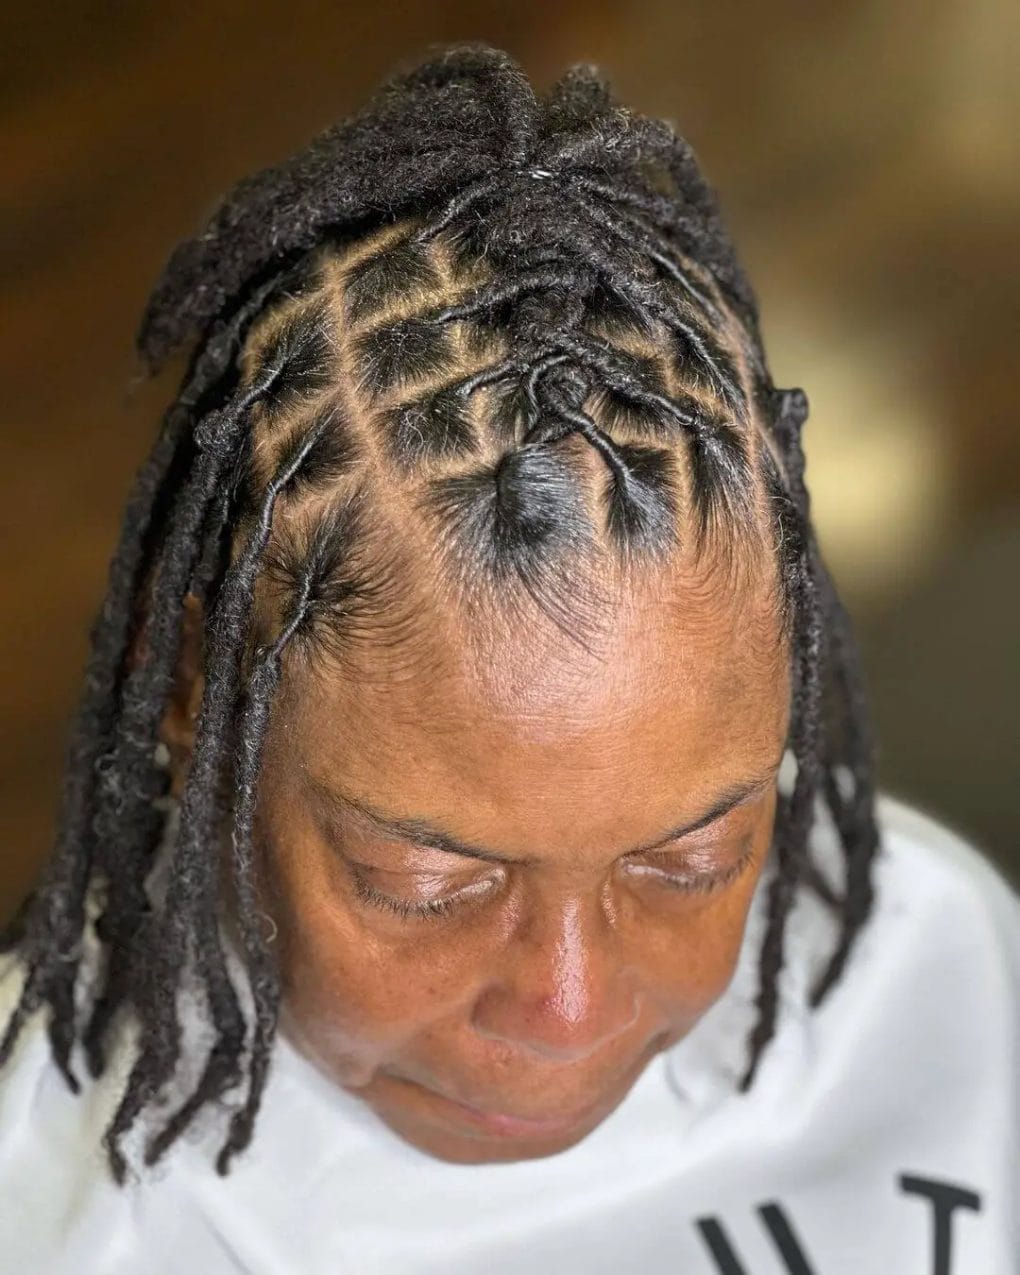 Natural black hair with a mix of cornrows and dreadlocks for cultural flair.